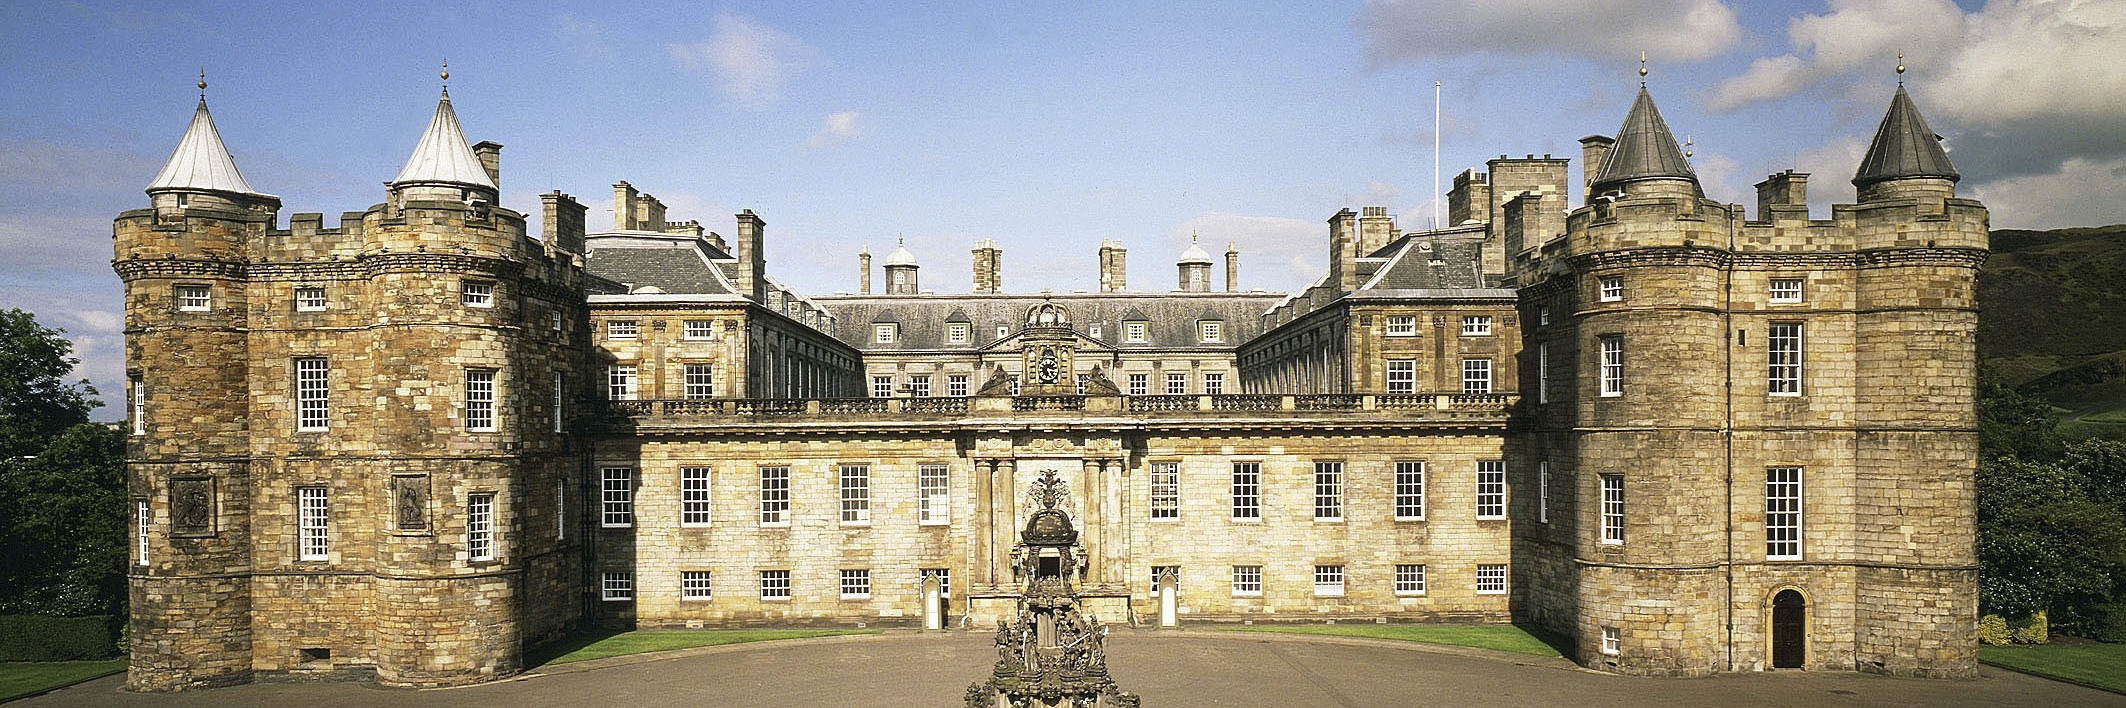 Cung điện Holyroodhouse (Palace Of Holyroodhouse),...